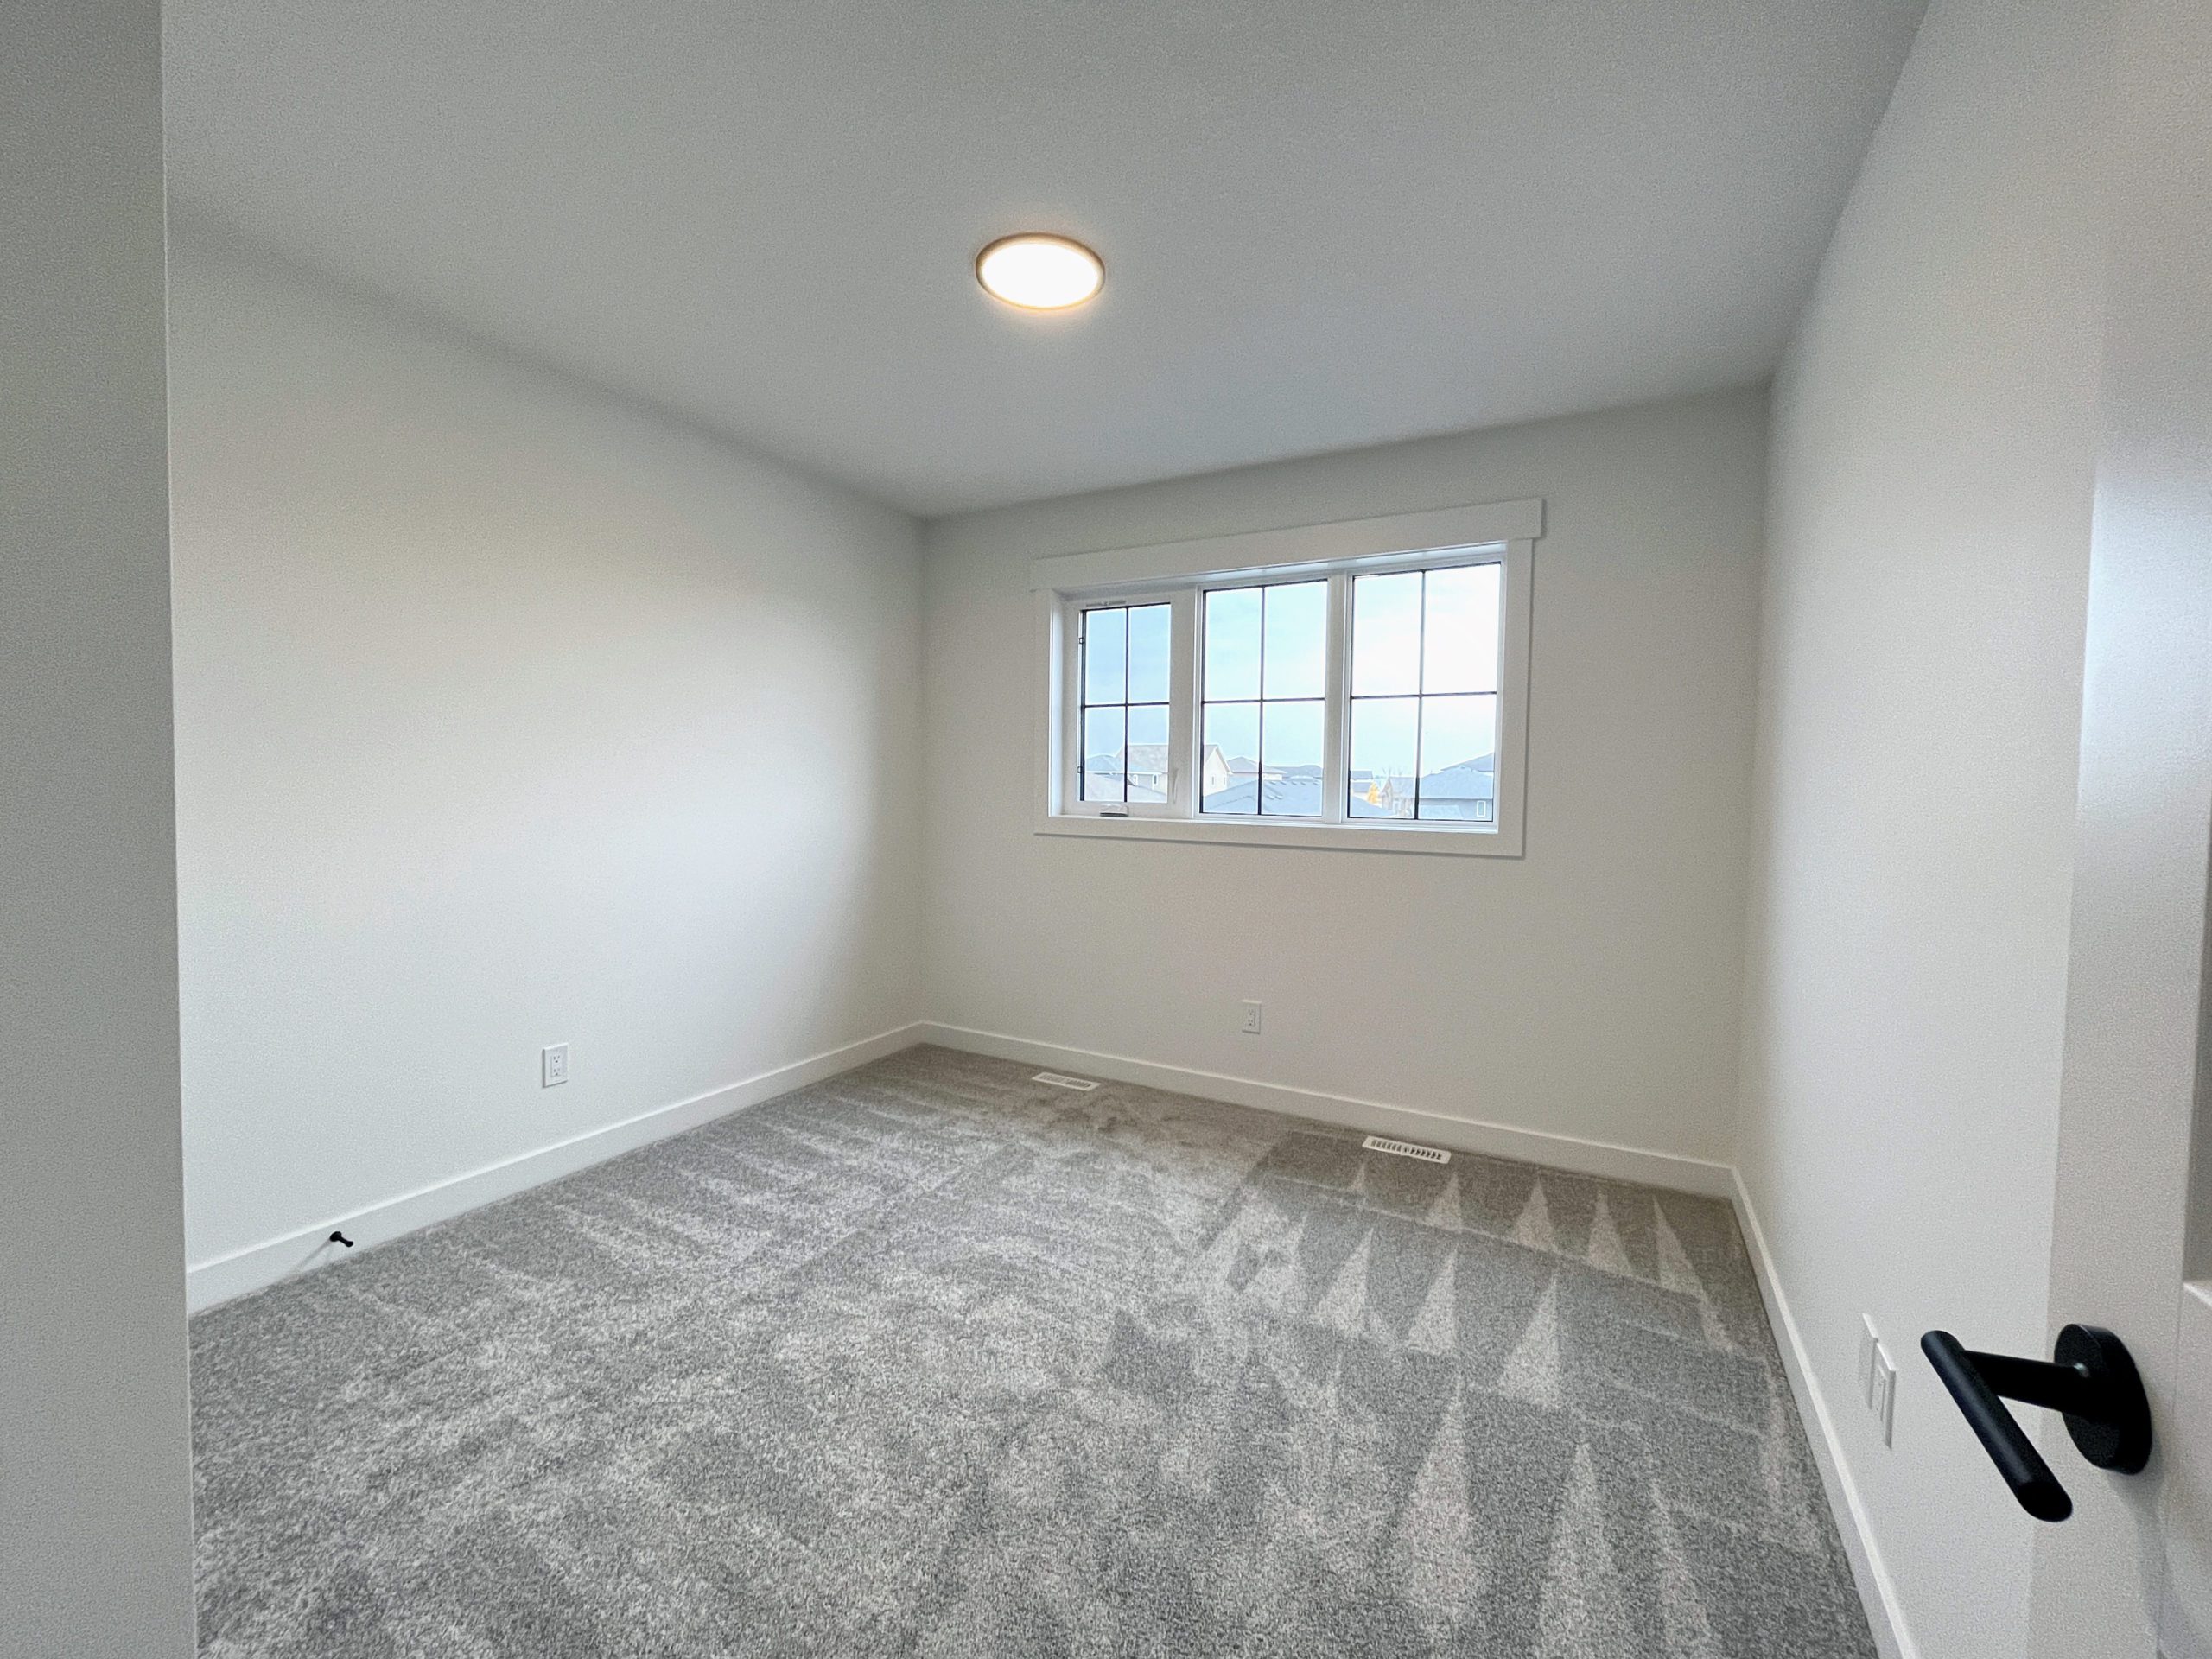 An empty room with a flat profile ceiling fixture with a carpeted floor and a window.